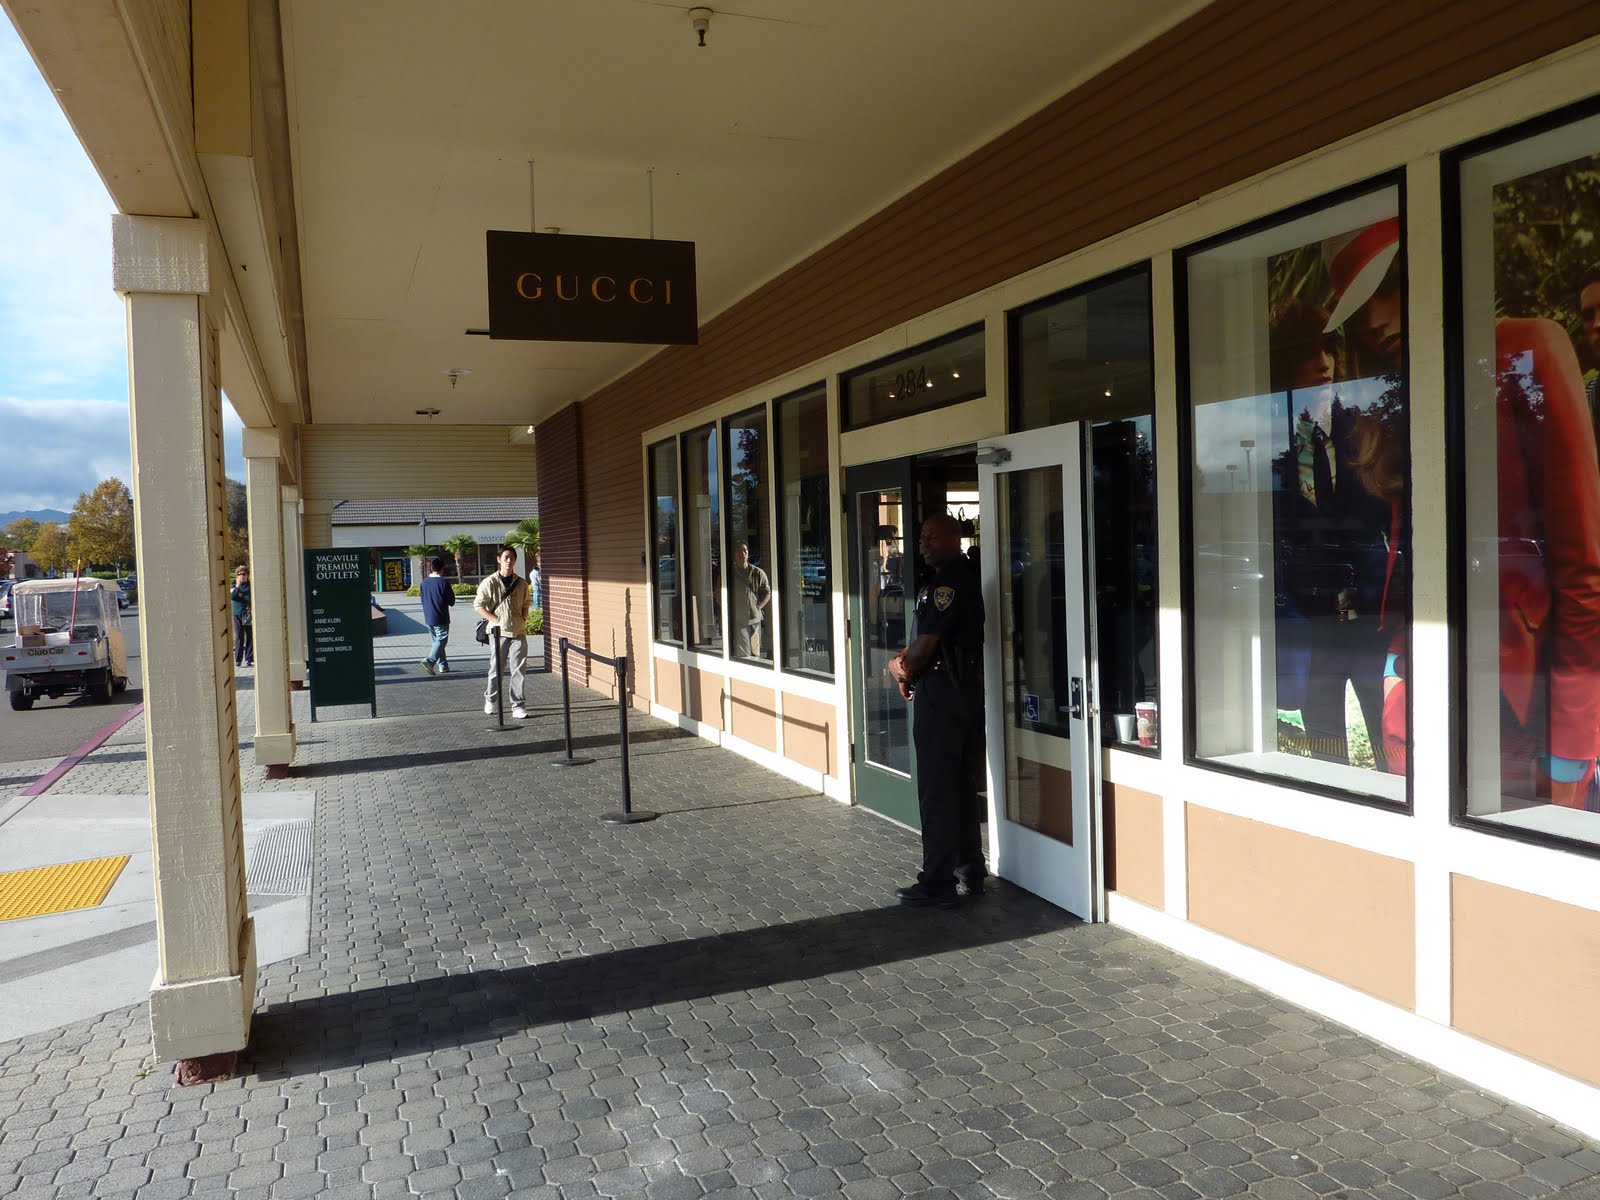 Trace my footsteps: Gucci Sales at Gucci Outlet Mall